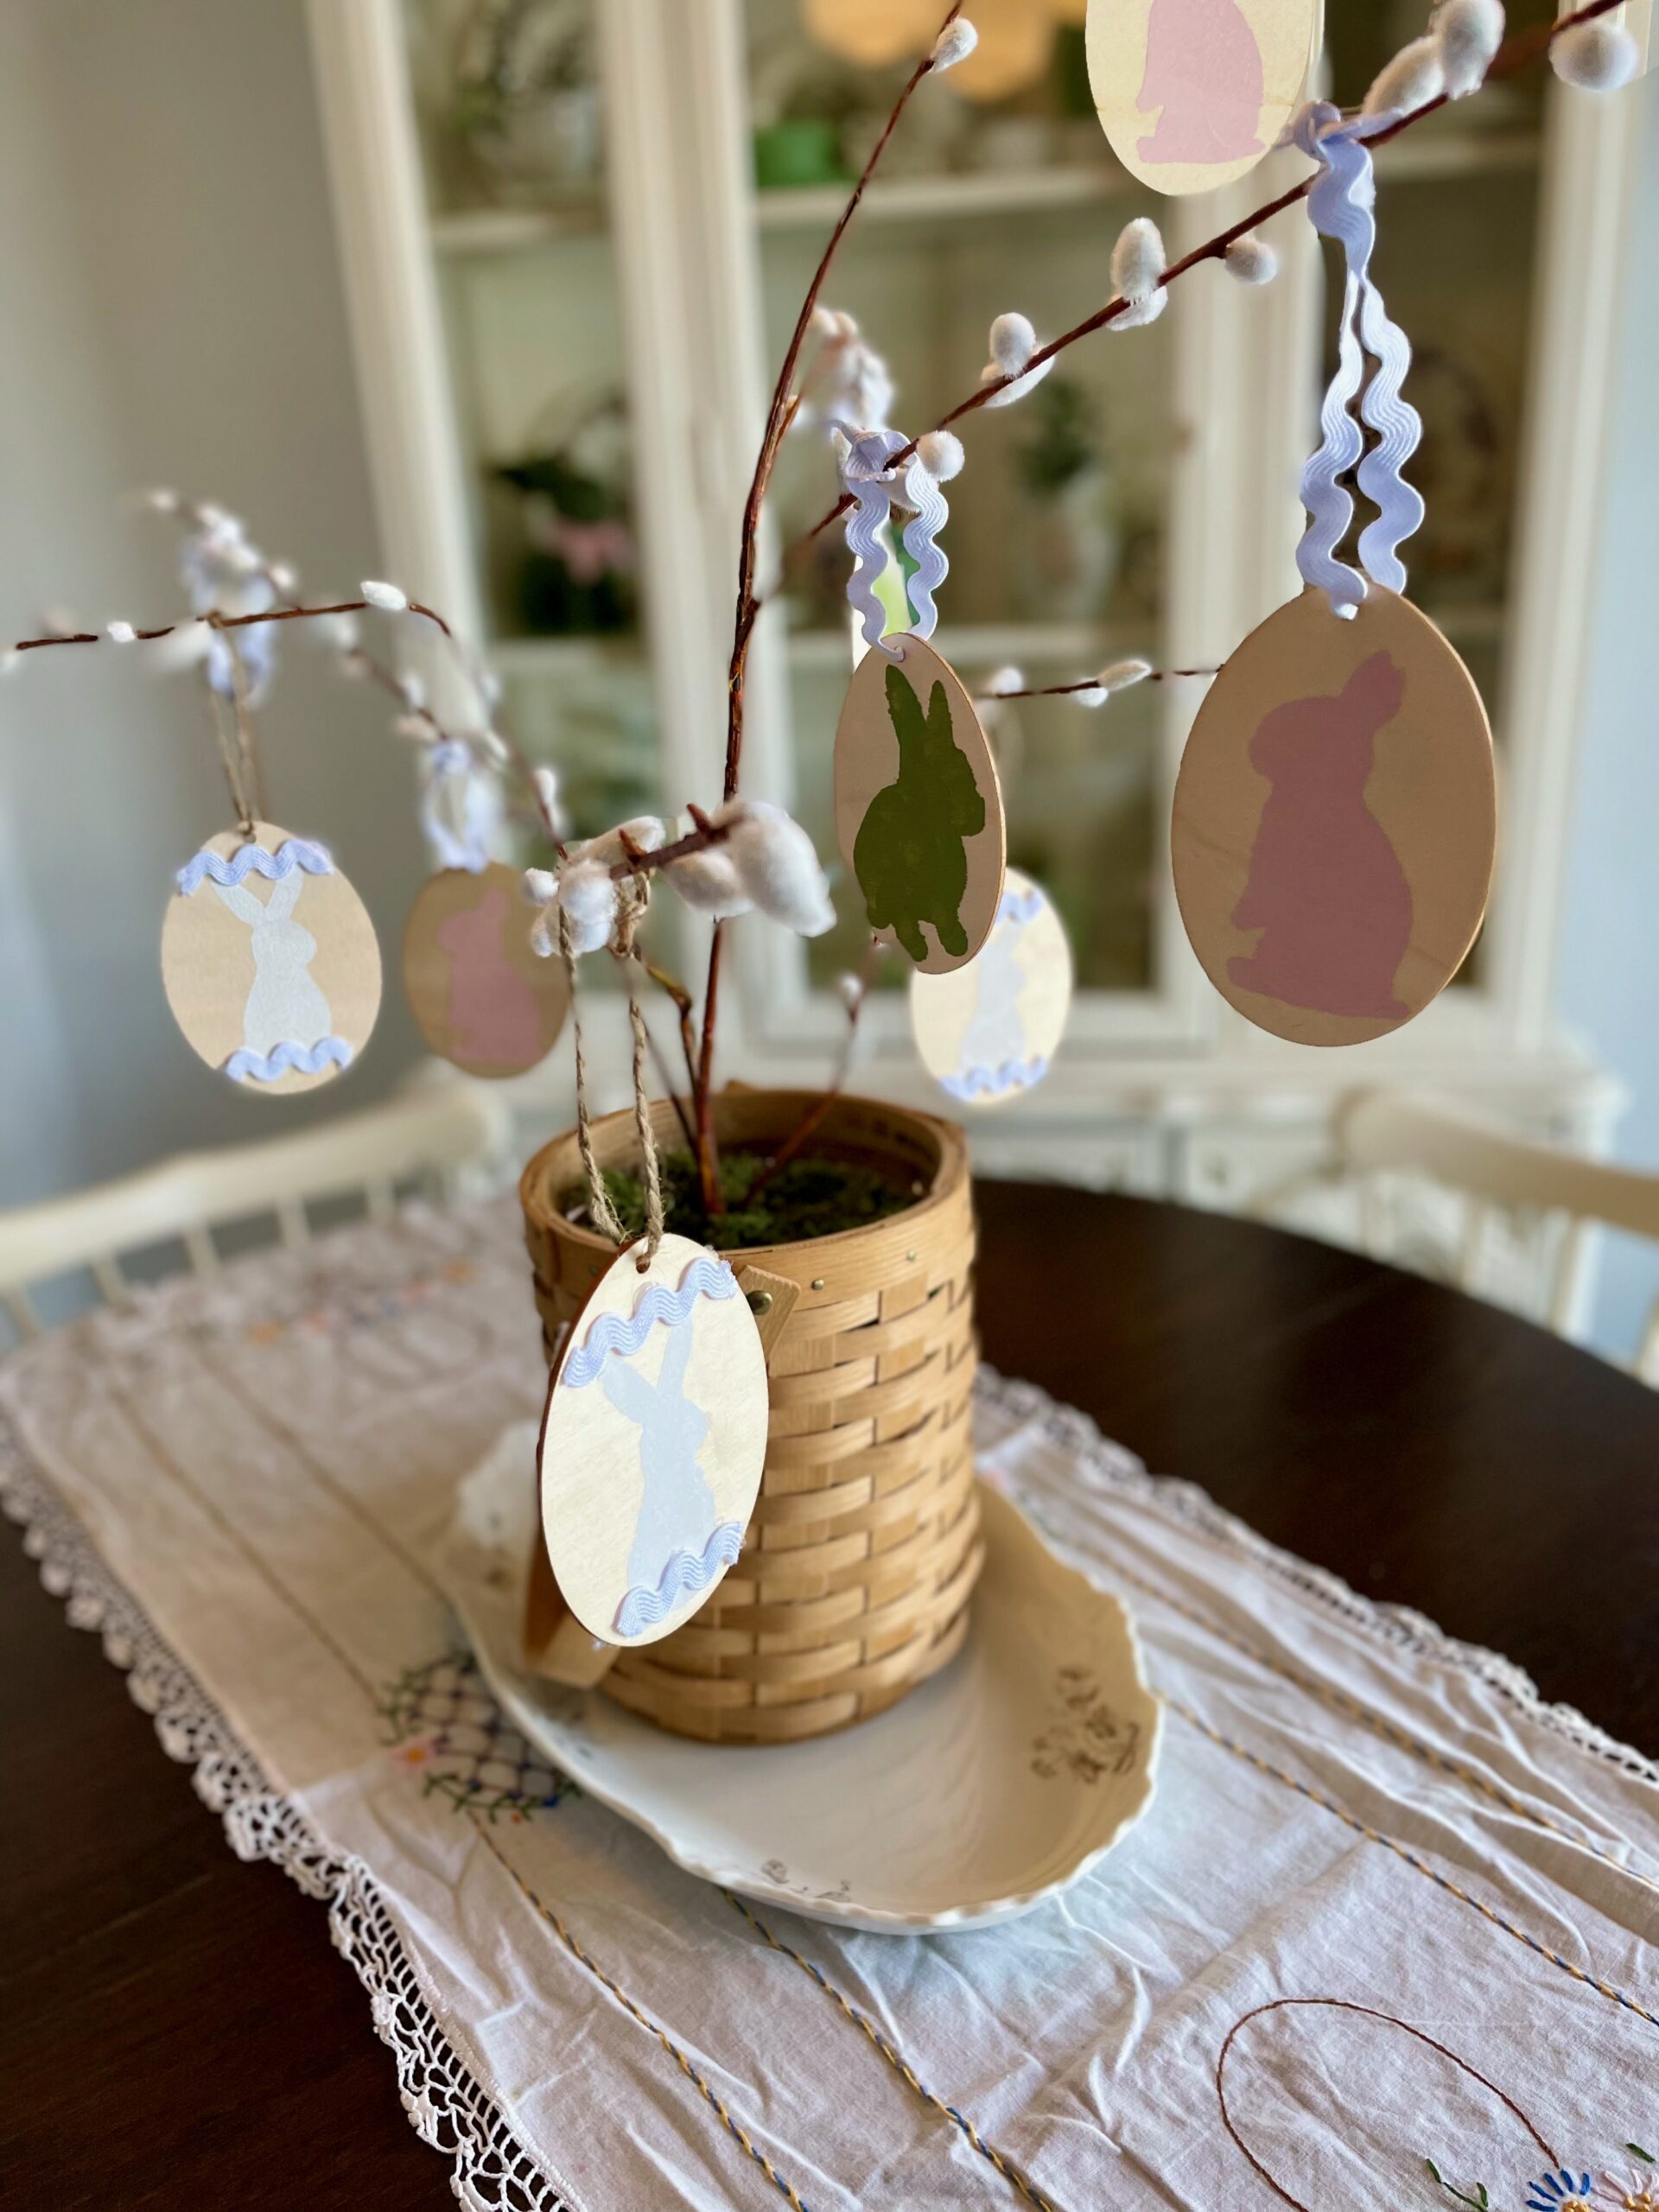 DIY bunny ornaments for an Easter tree